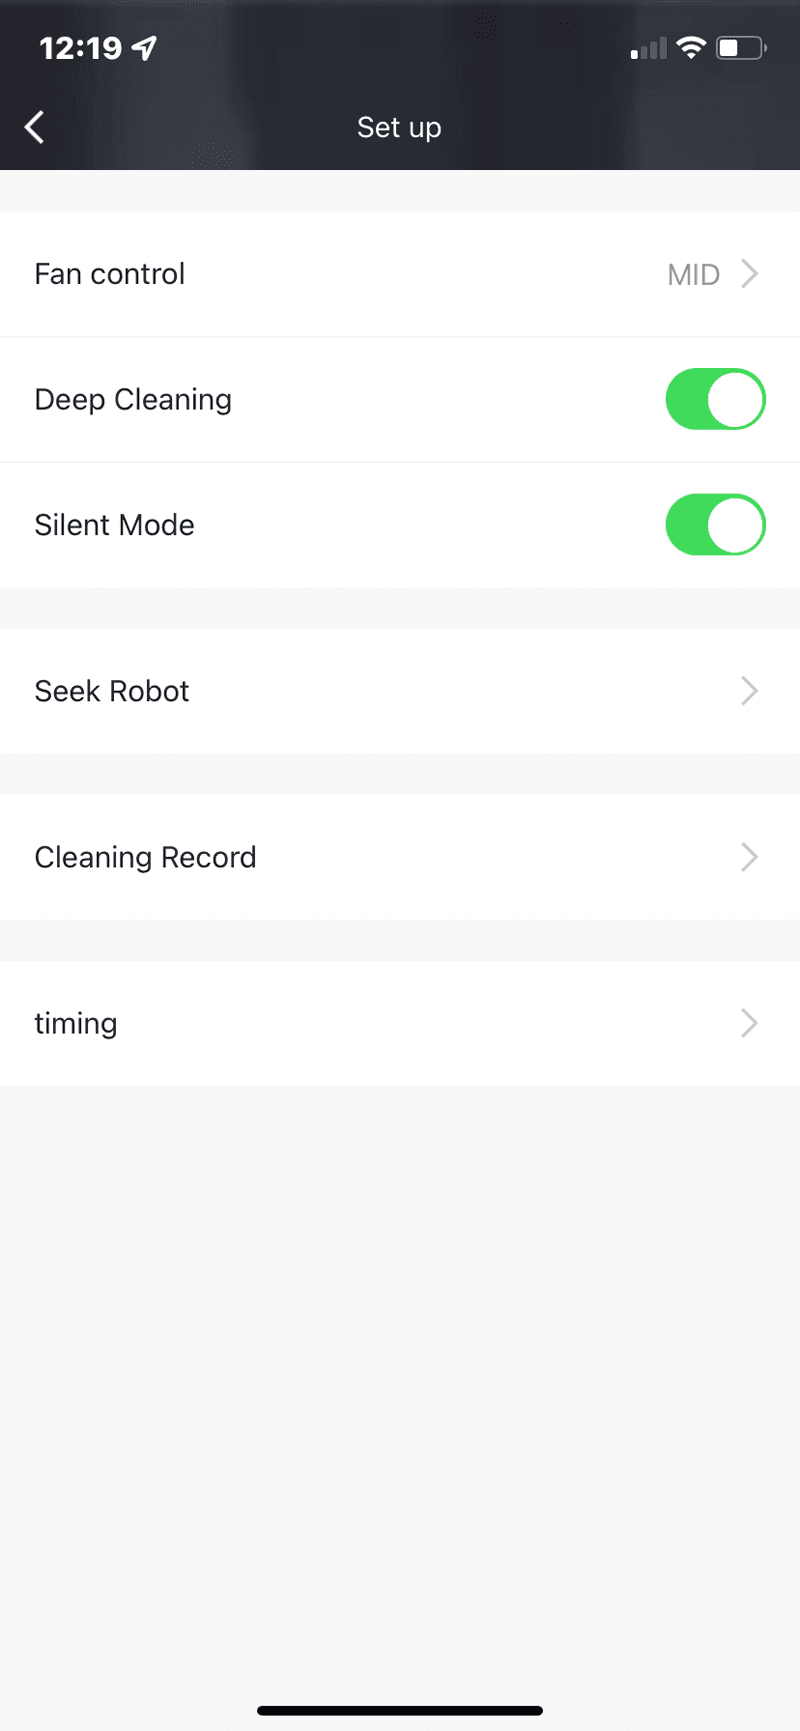 Access the cleaning record anytime